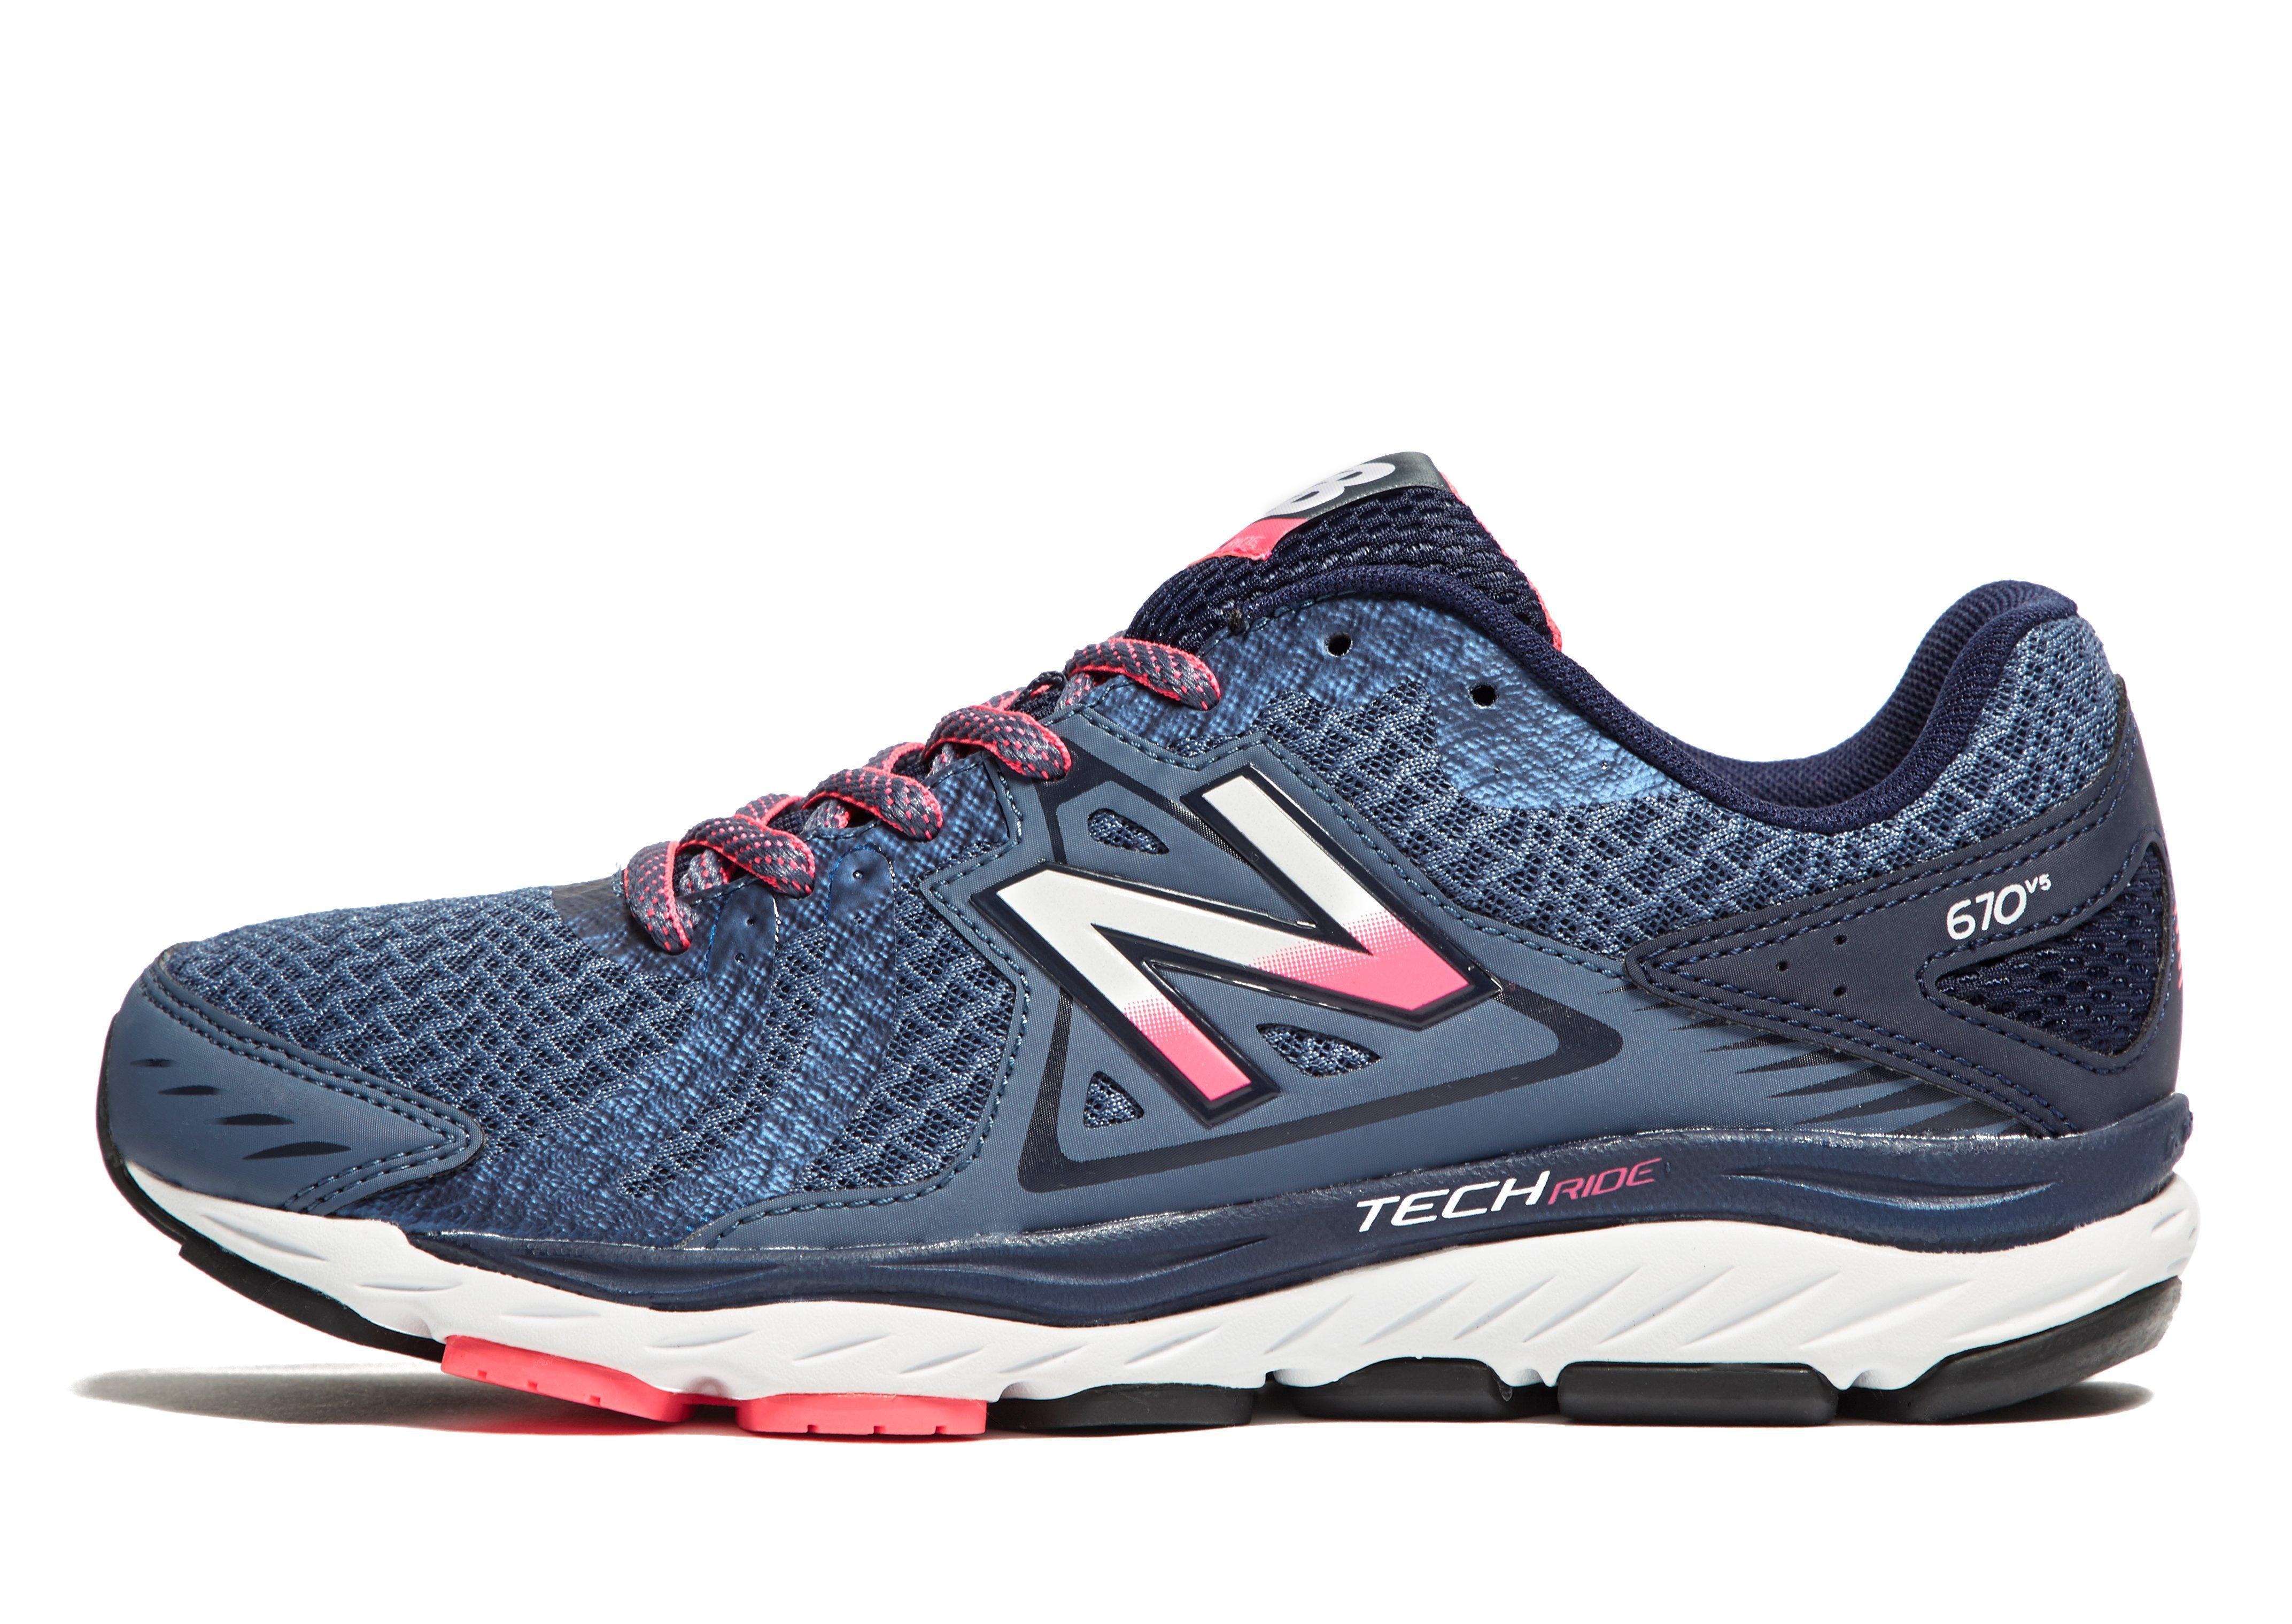 New Balance Synthetic 670v5 in Blue 